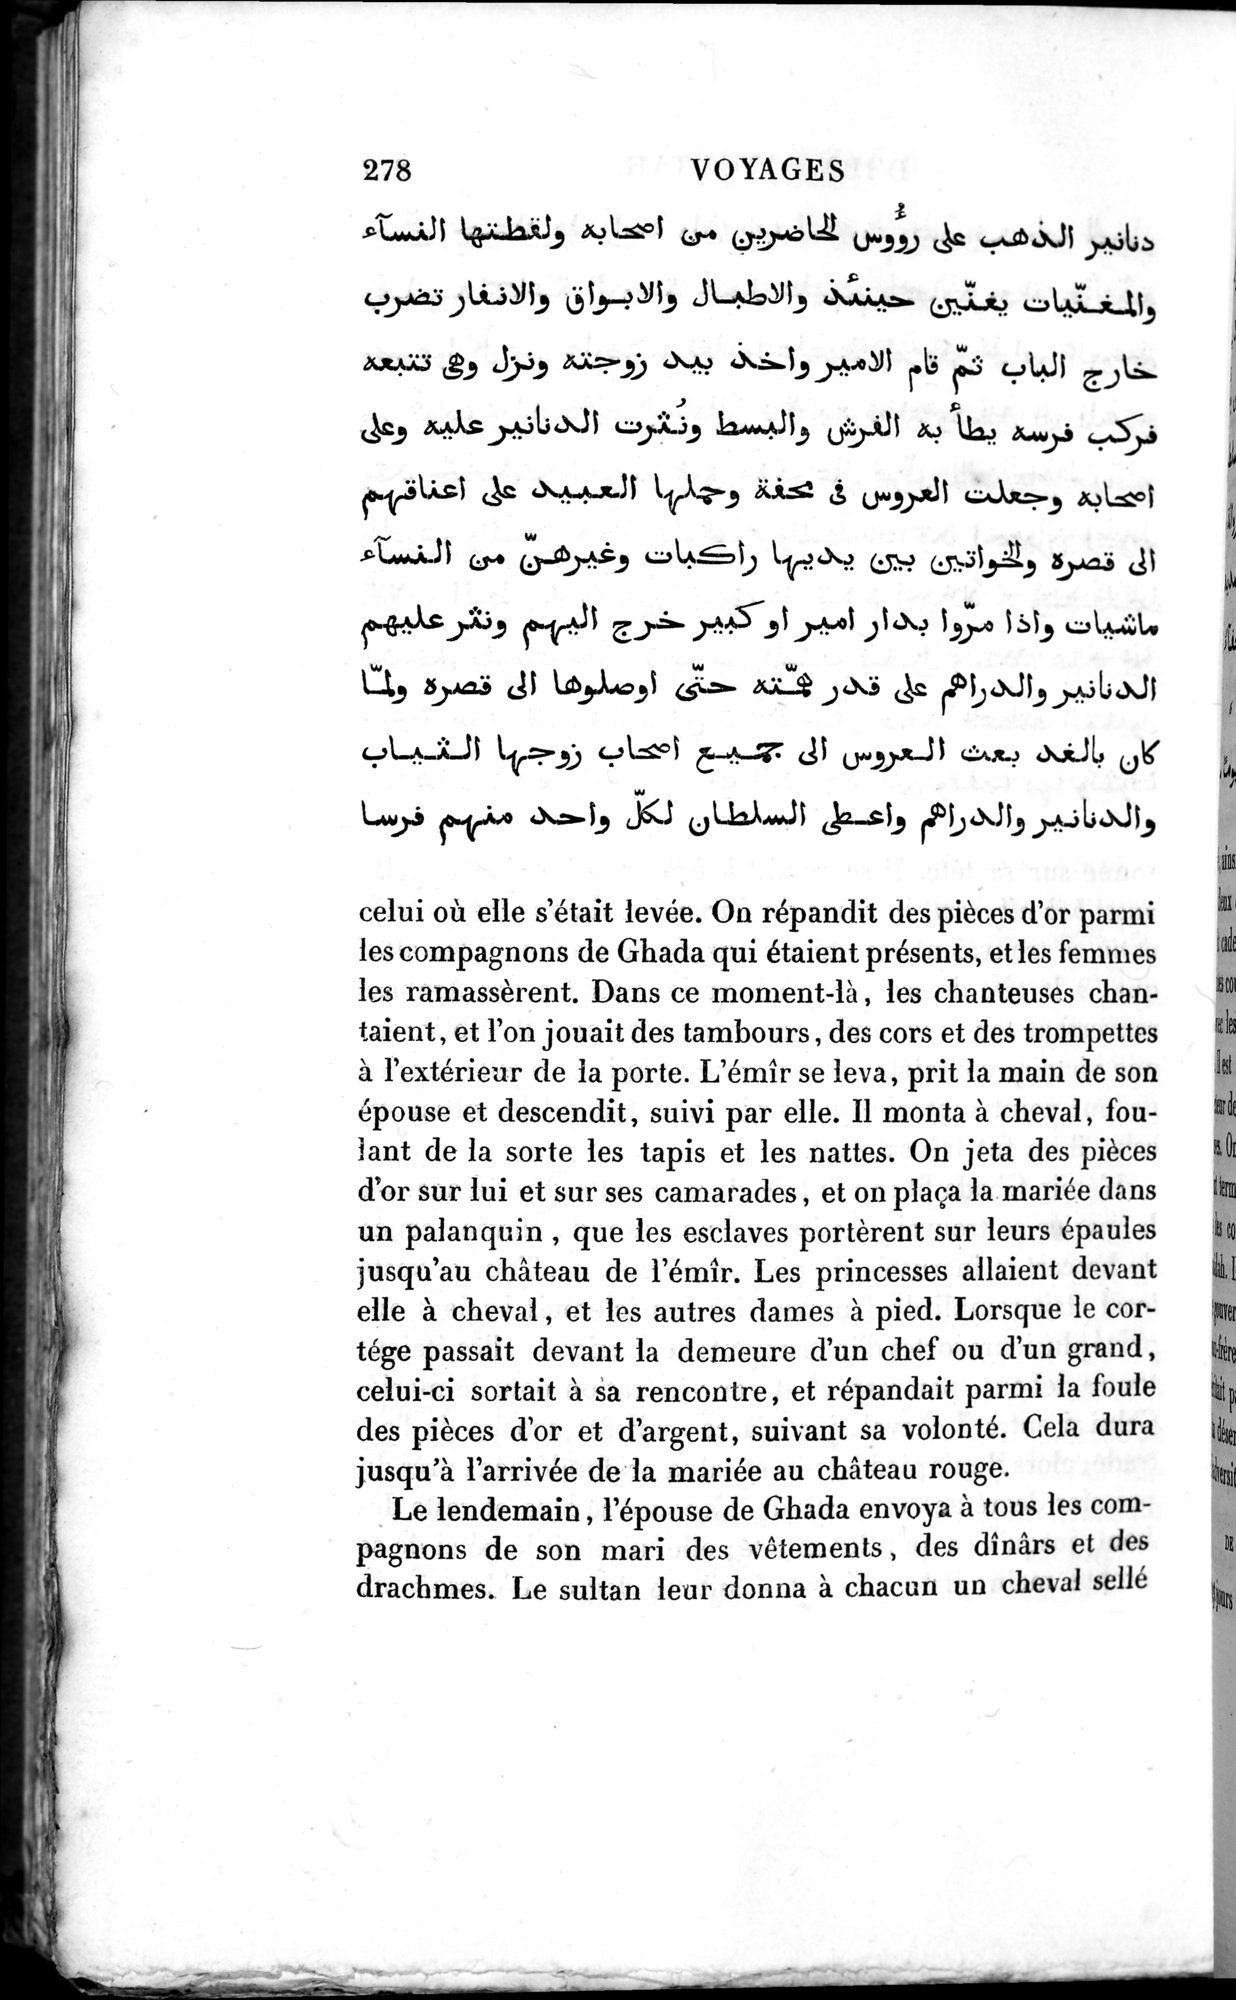 Voyages d'Ibn Batoutah : vol.3 / Page 318 (Grayscale High Resolution Image)